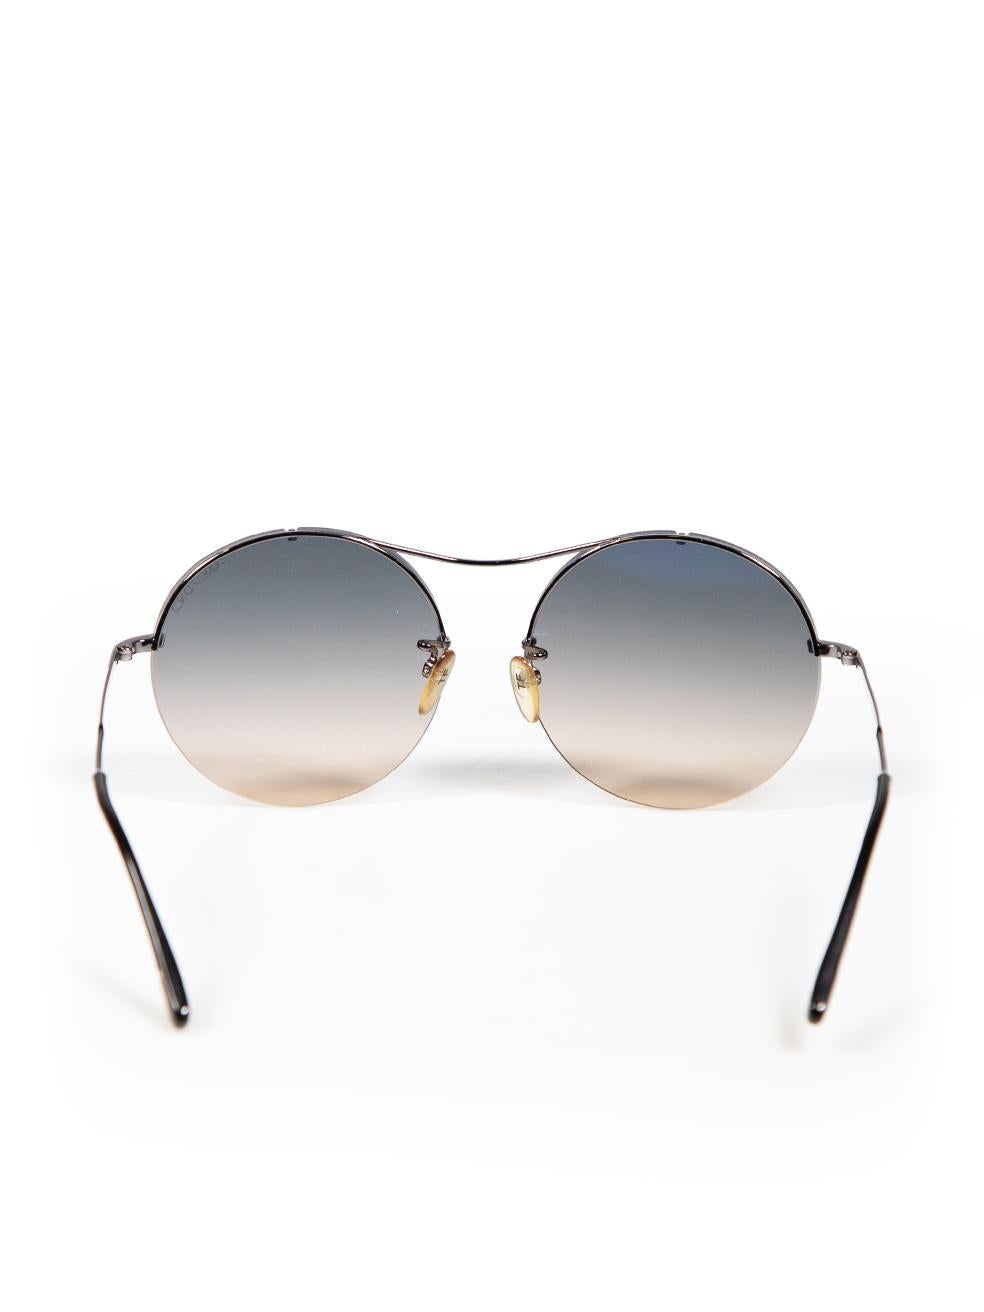 Tom Ford Black Veronique Round Frame Sunglasses In Good Condition For Sale In London, GB